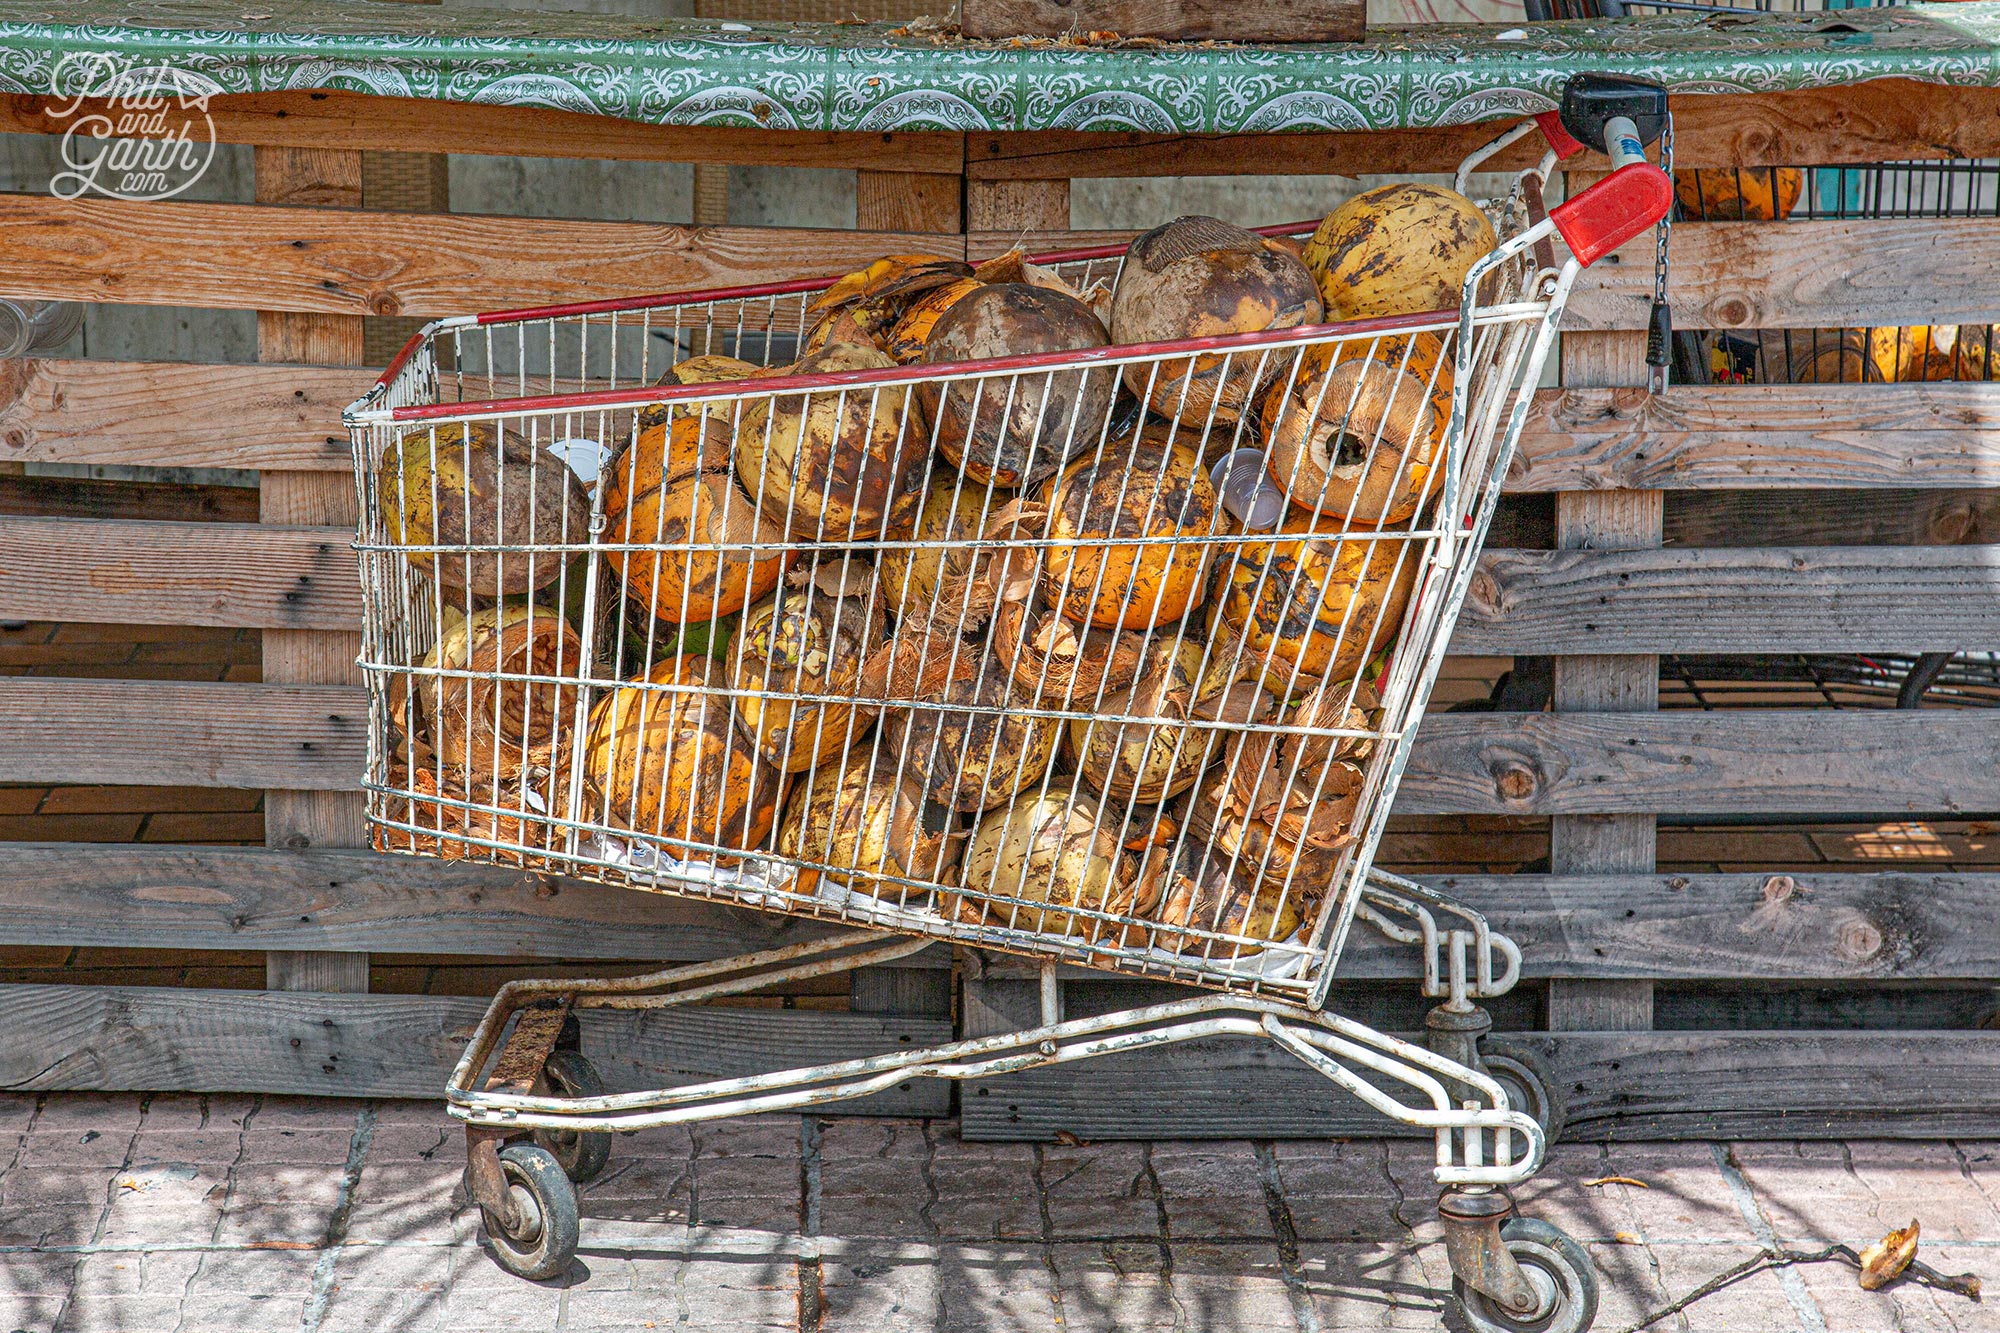 Shopping trolley of coconuts in Marigot